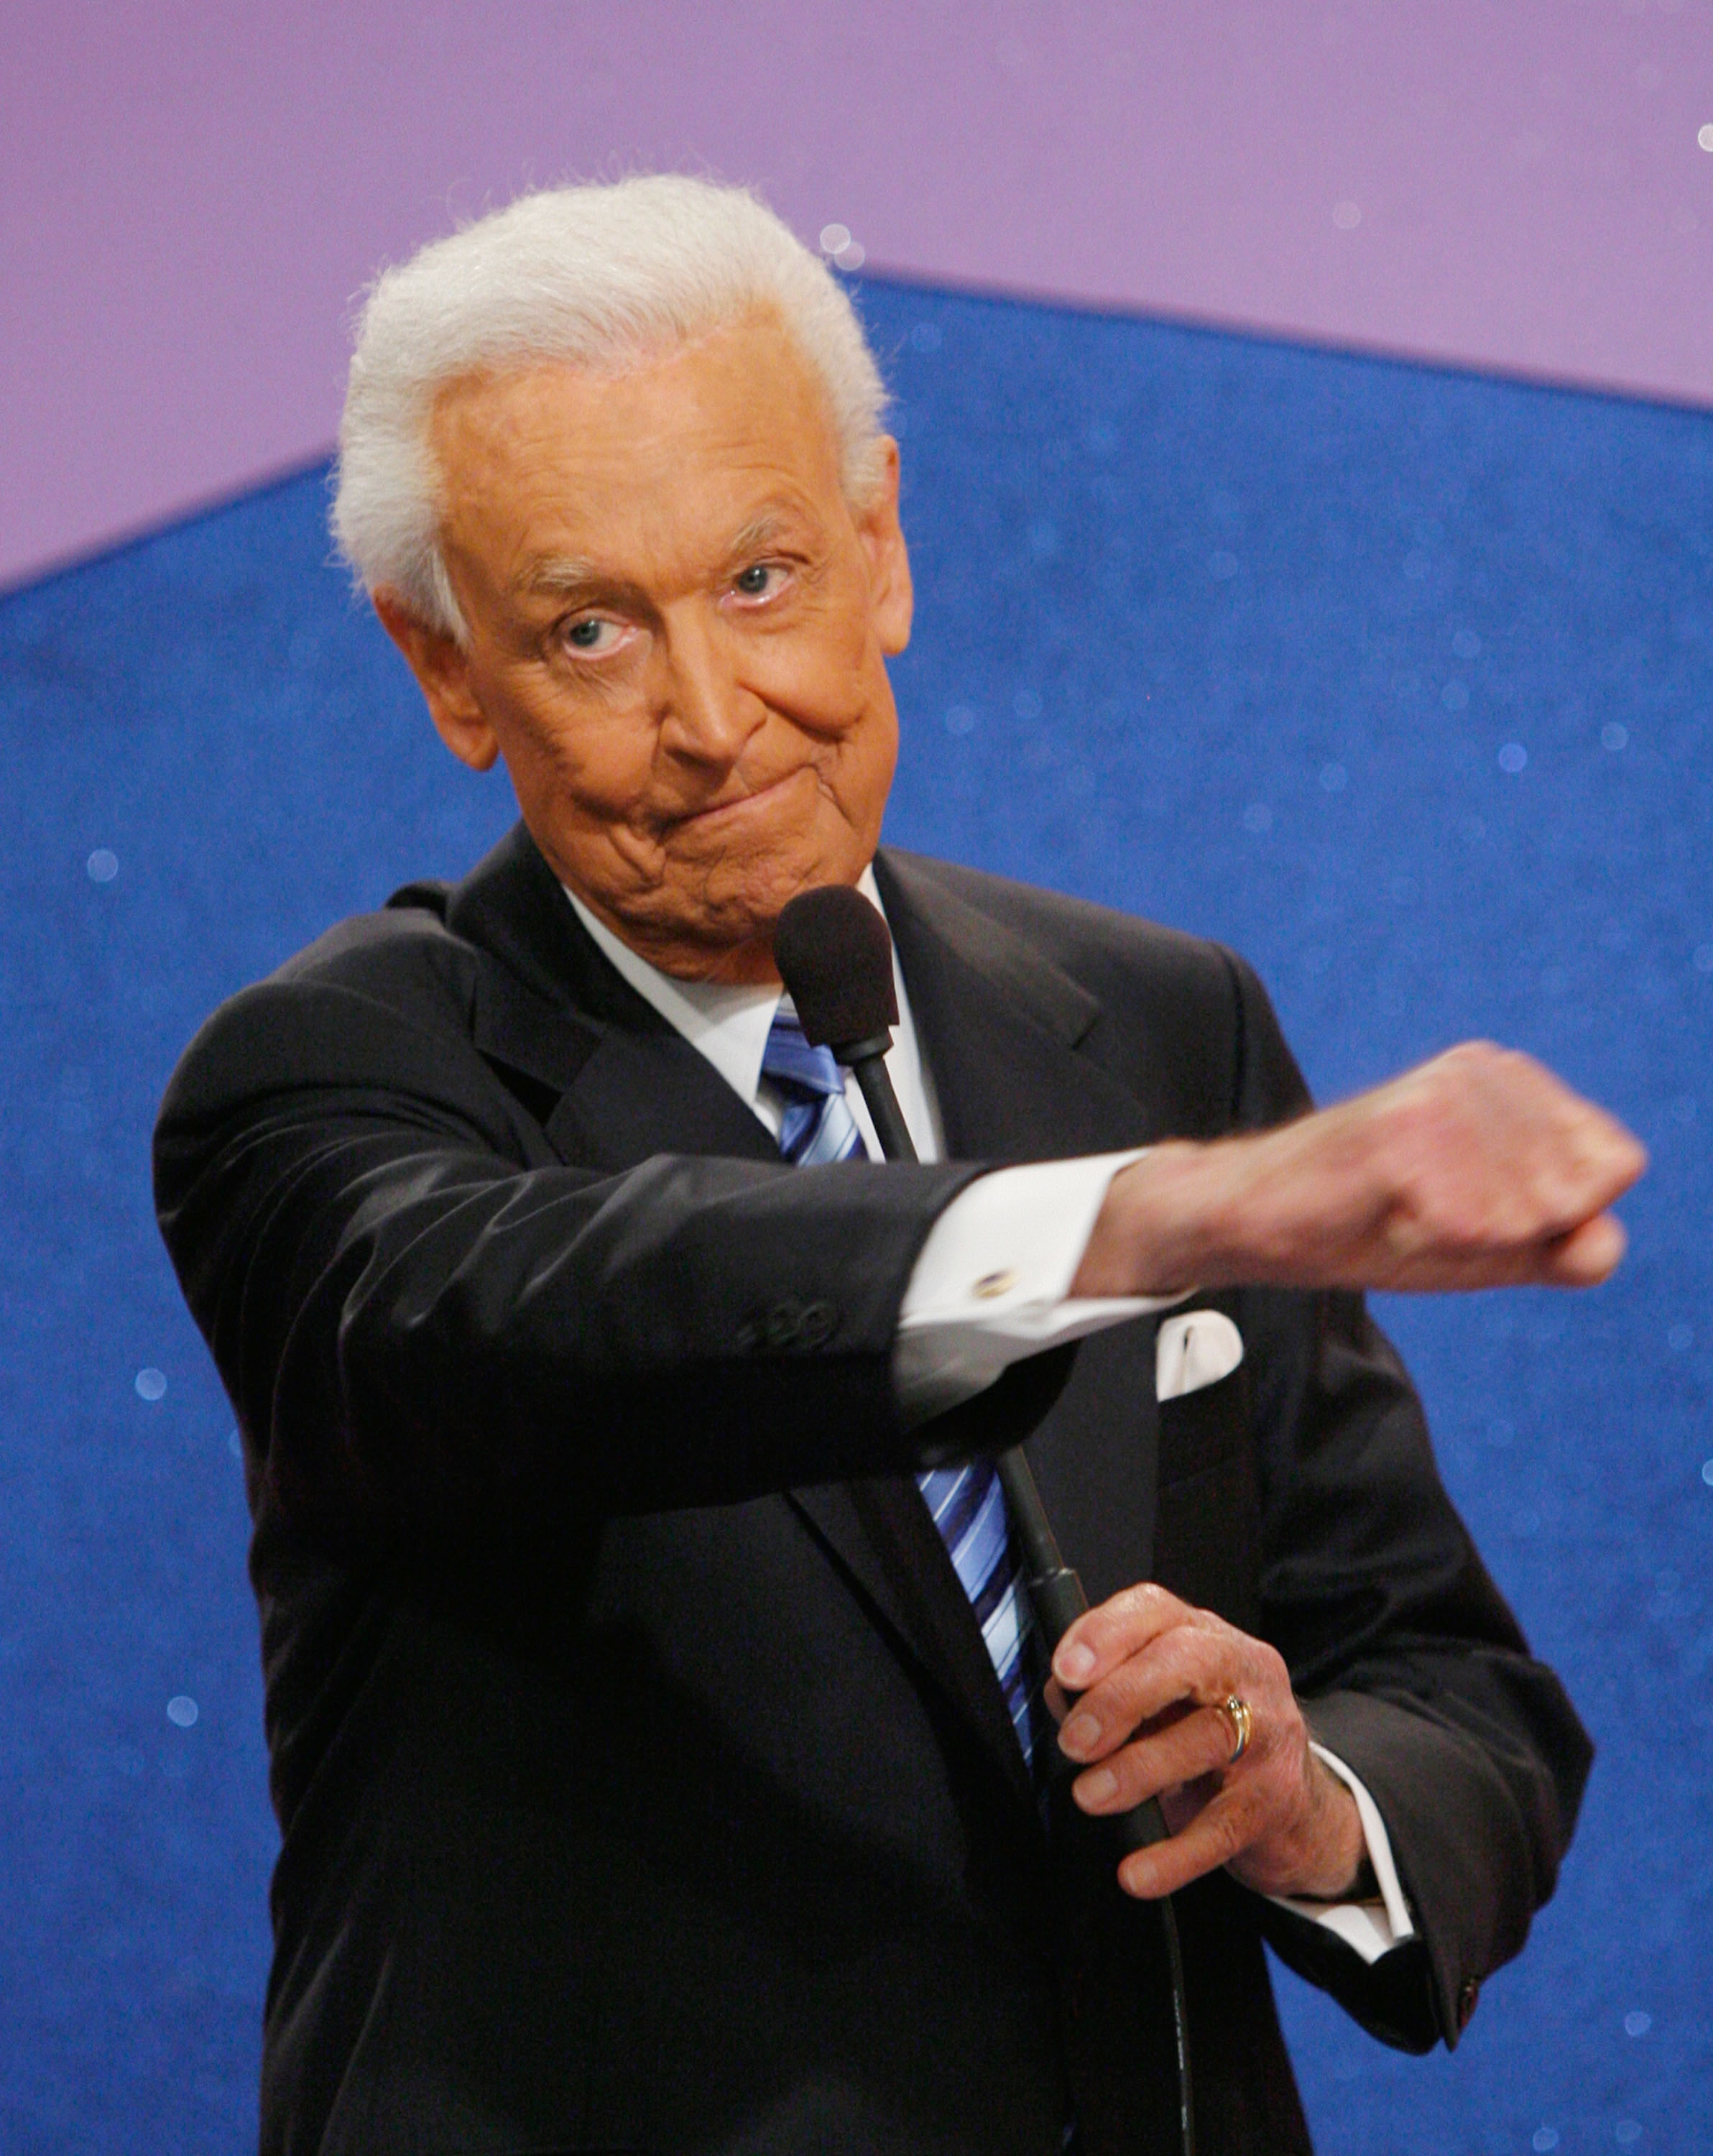 Bob Barker during his last taping of "The Price is Right" show held at the CBS television city studios on June 6, 2007 in Los Angeles, California. | Source: Getty Images